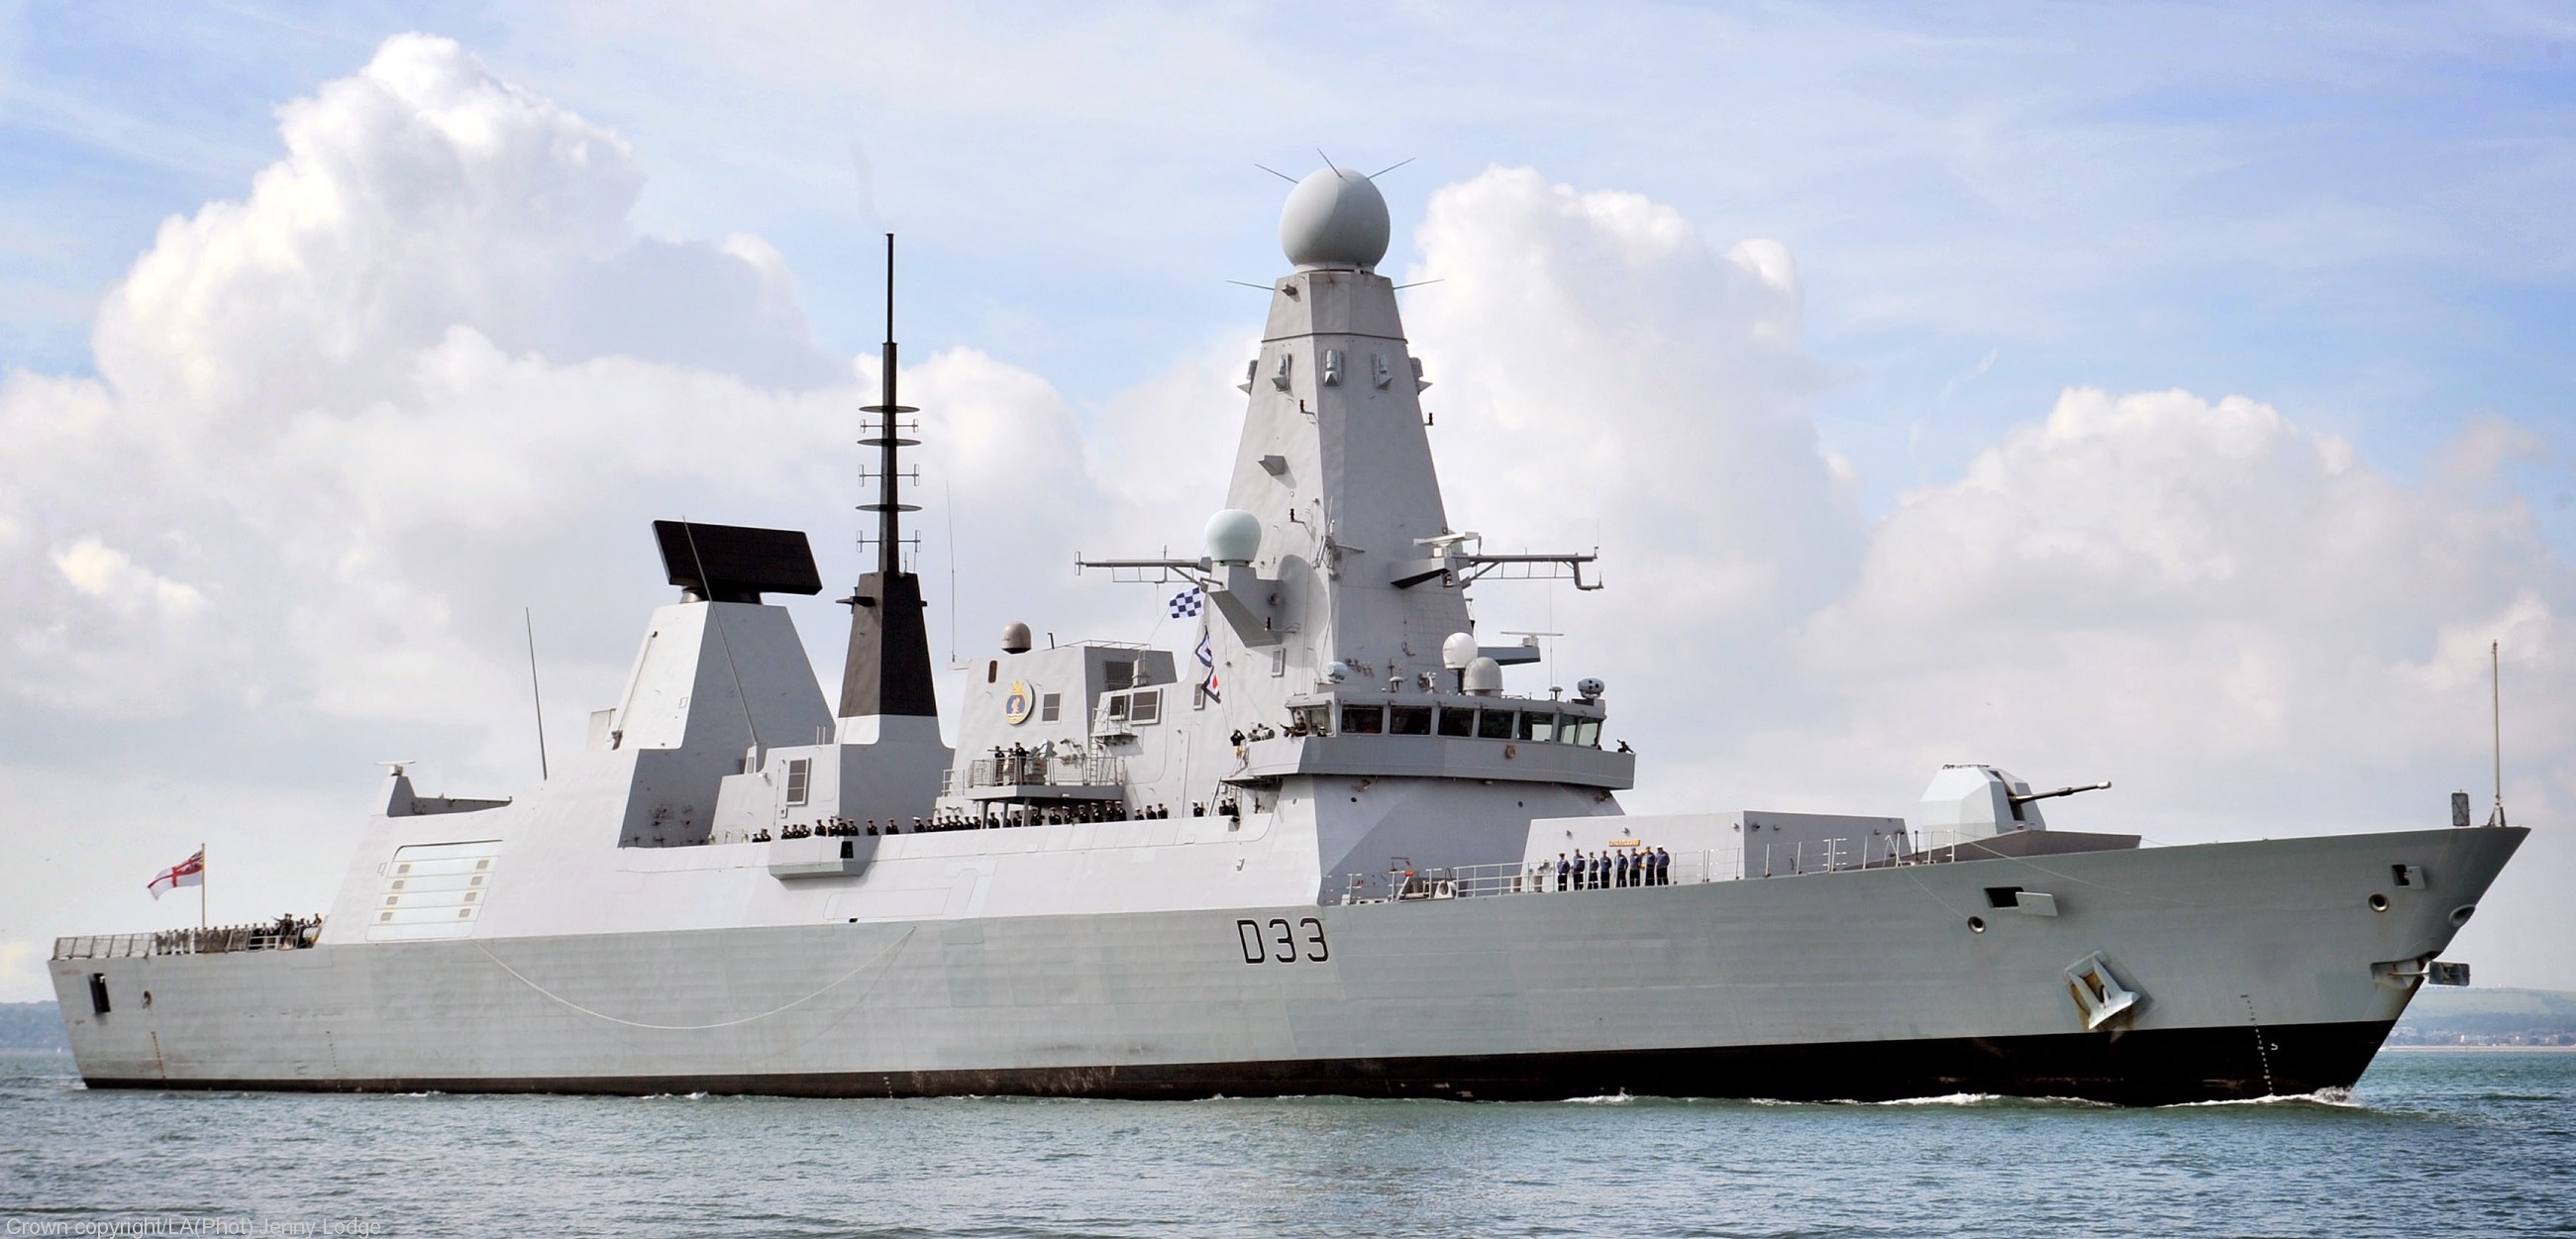 hms dauntless d-33 type 45 daring class guided missile destroyer royal navy sea viper paams 12